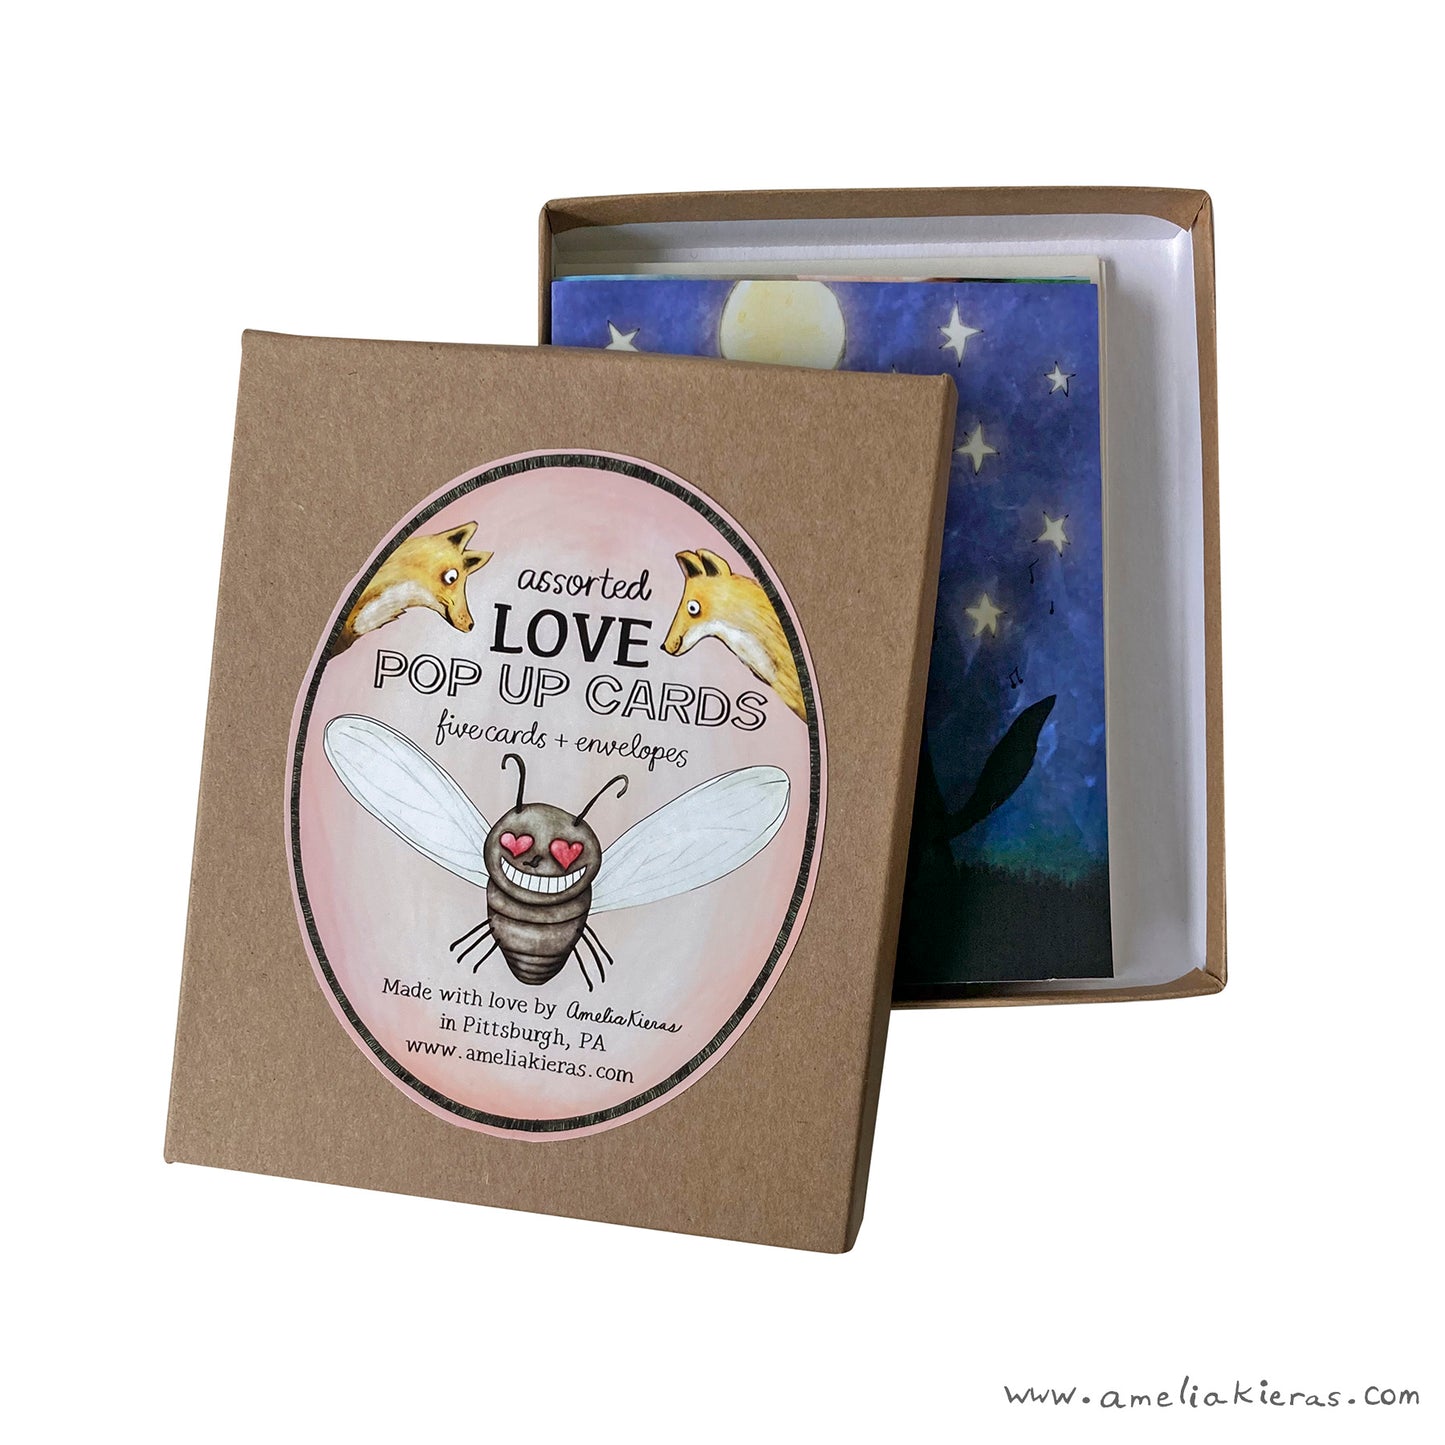 Love Themed Pop Up Card Box Set - Set of Five Assorted Pop Up Cards